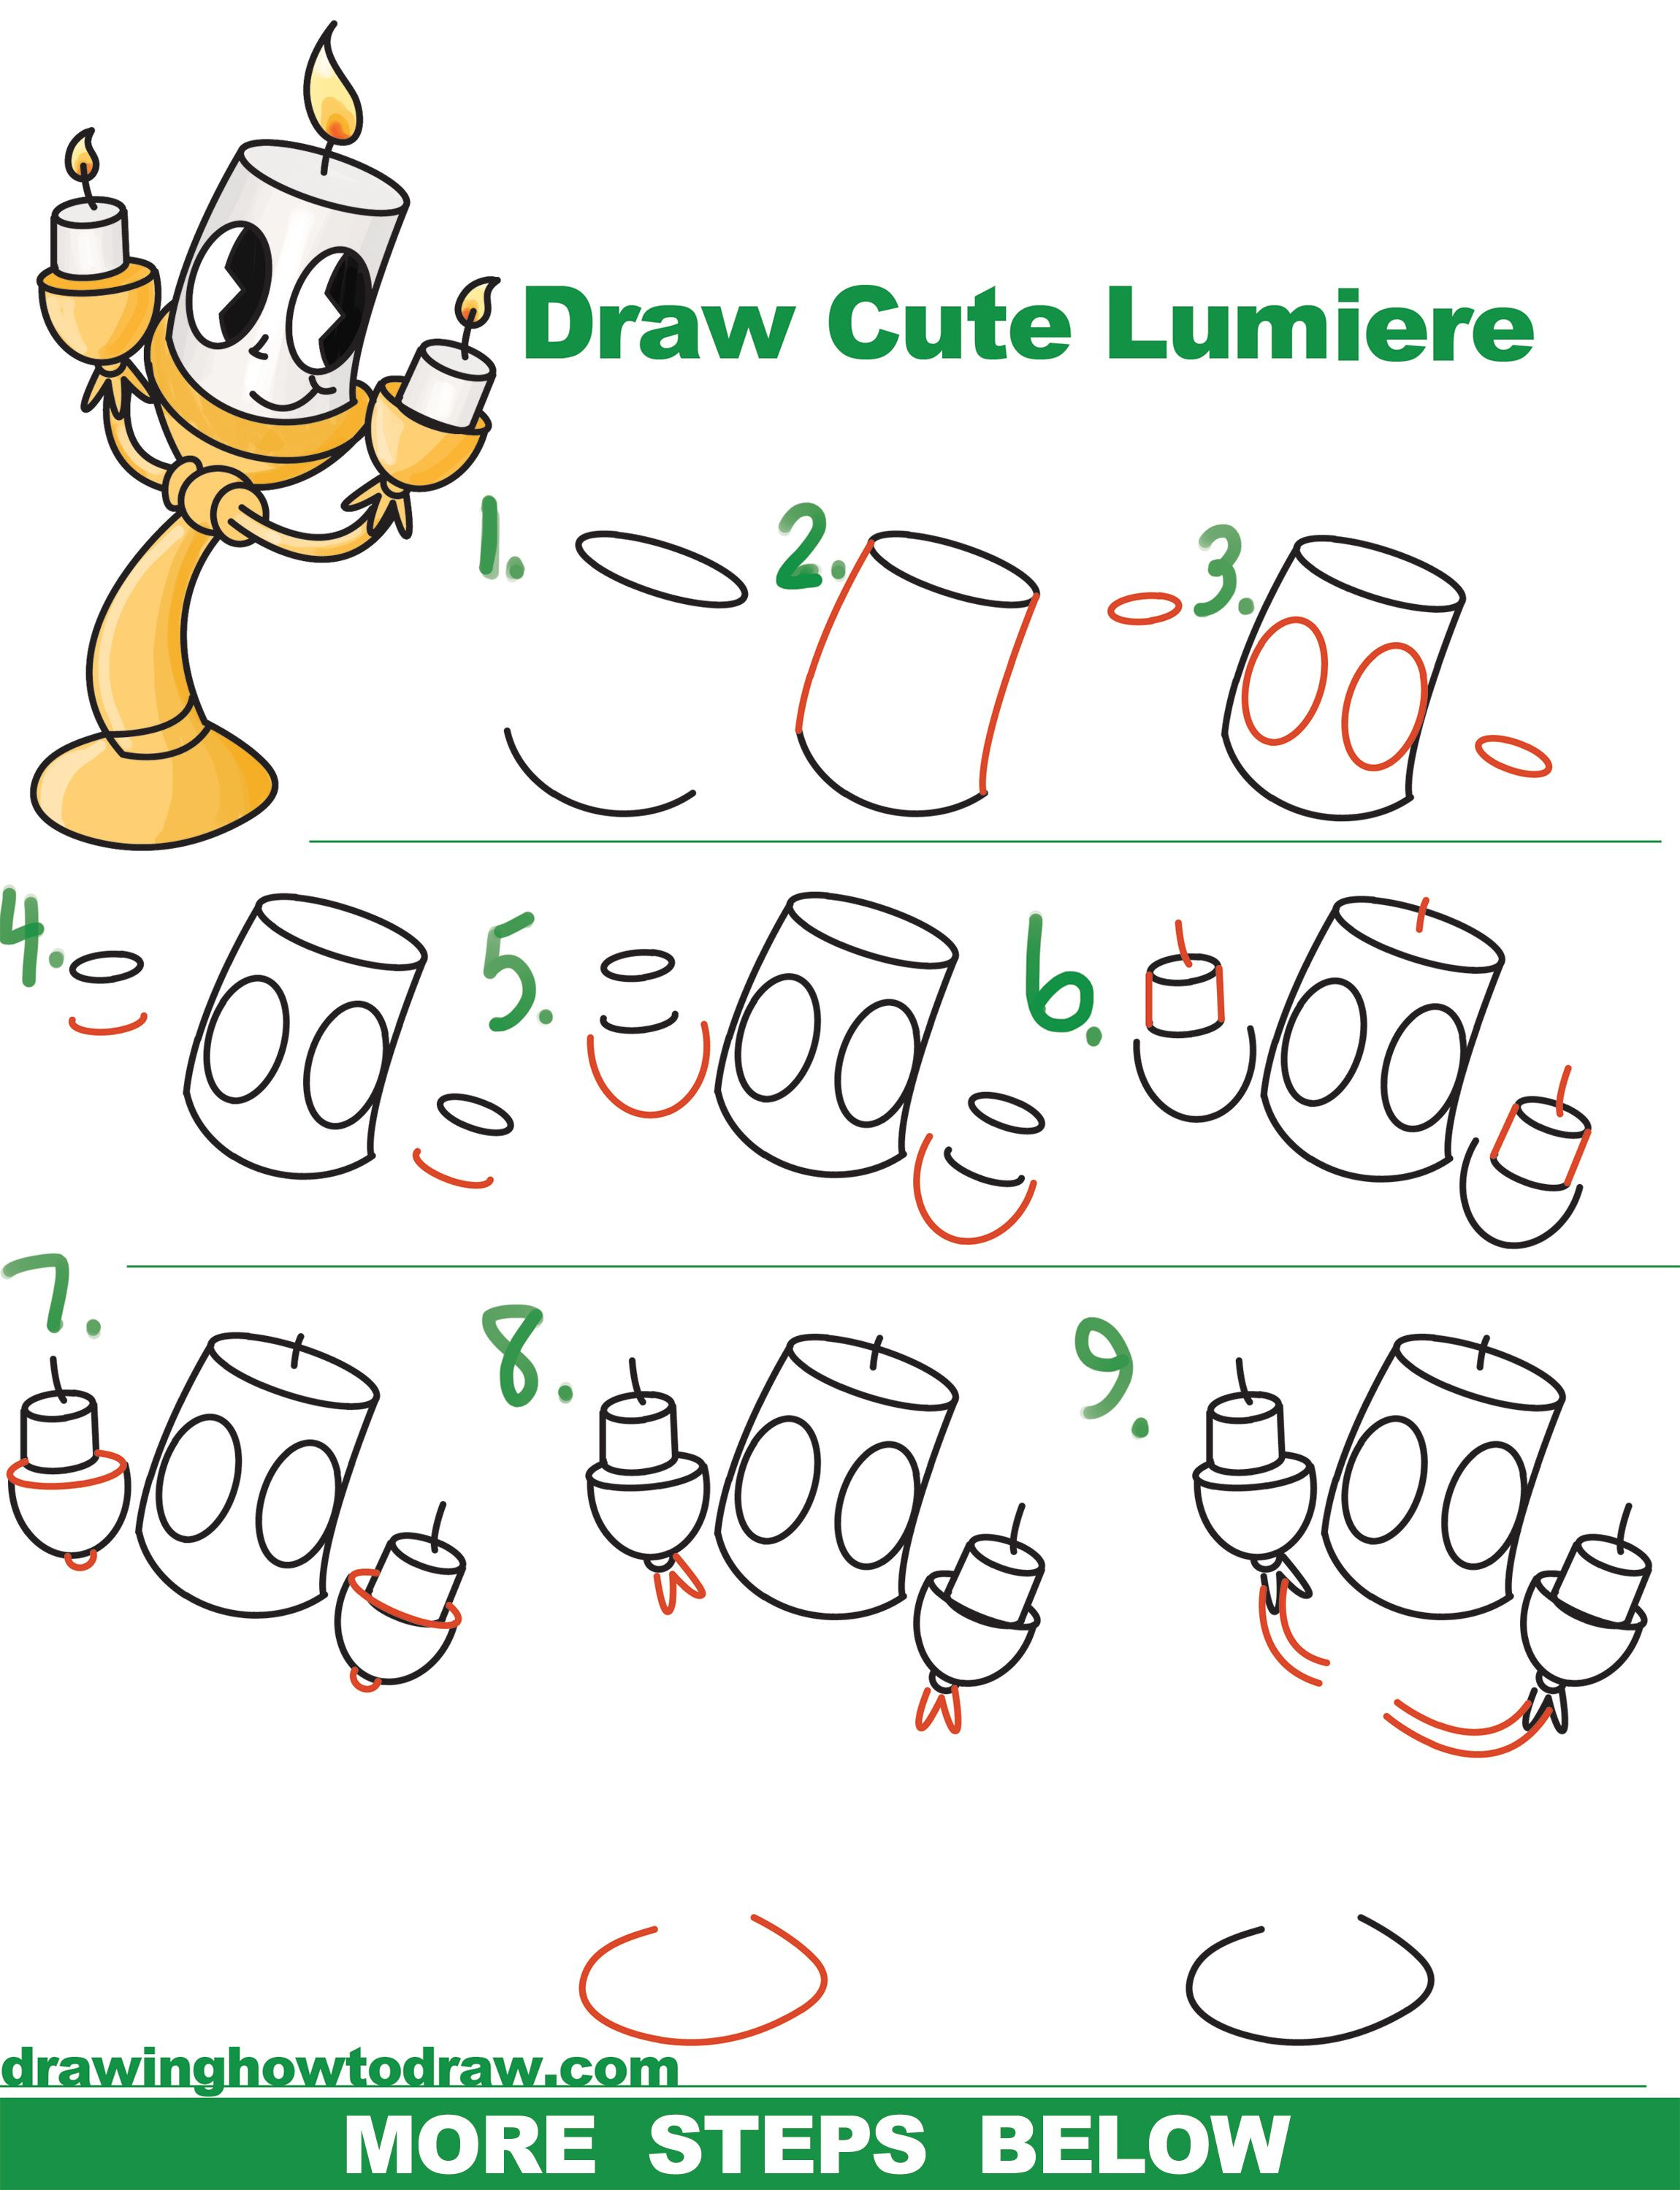 20+ Latest Easy Cute Cartoon Characters Cartoon Drawing Images | The